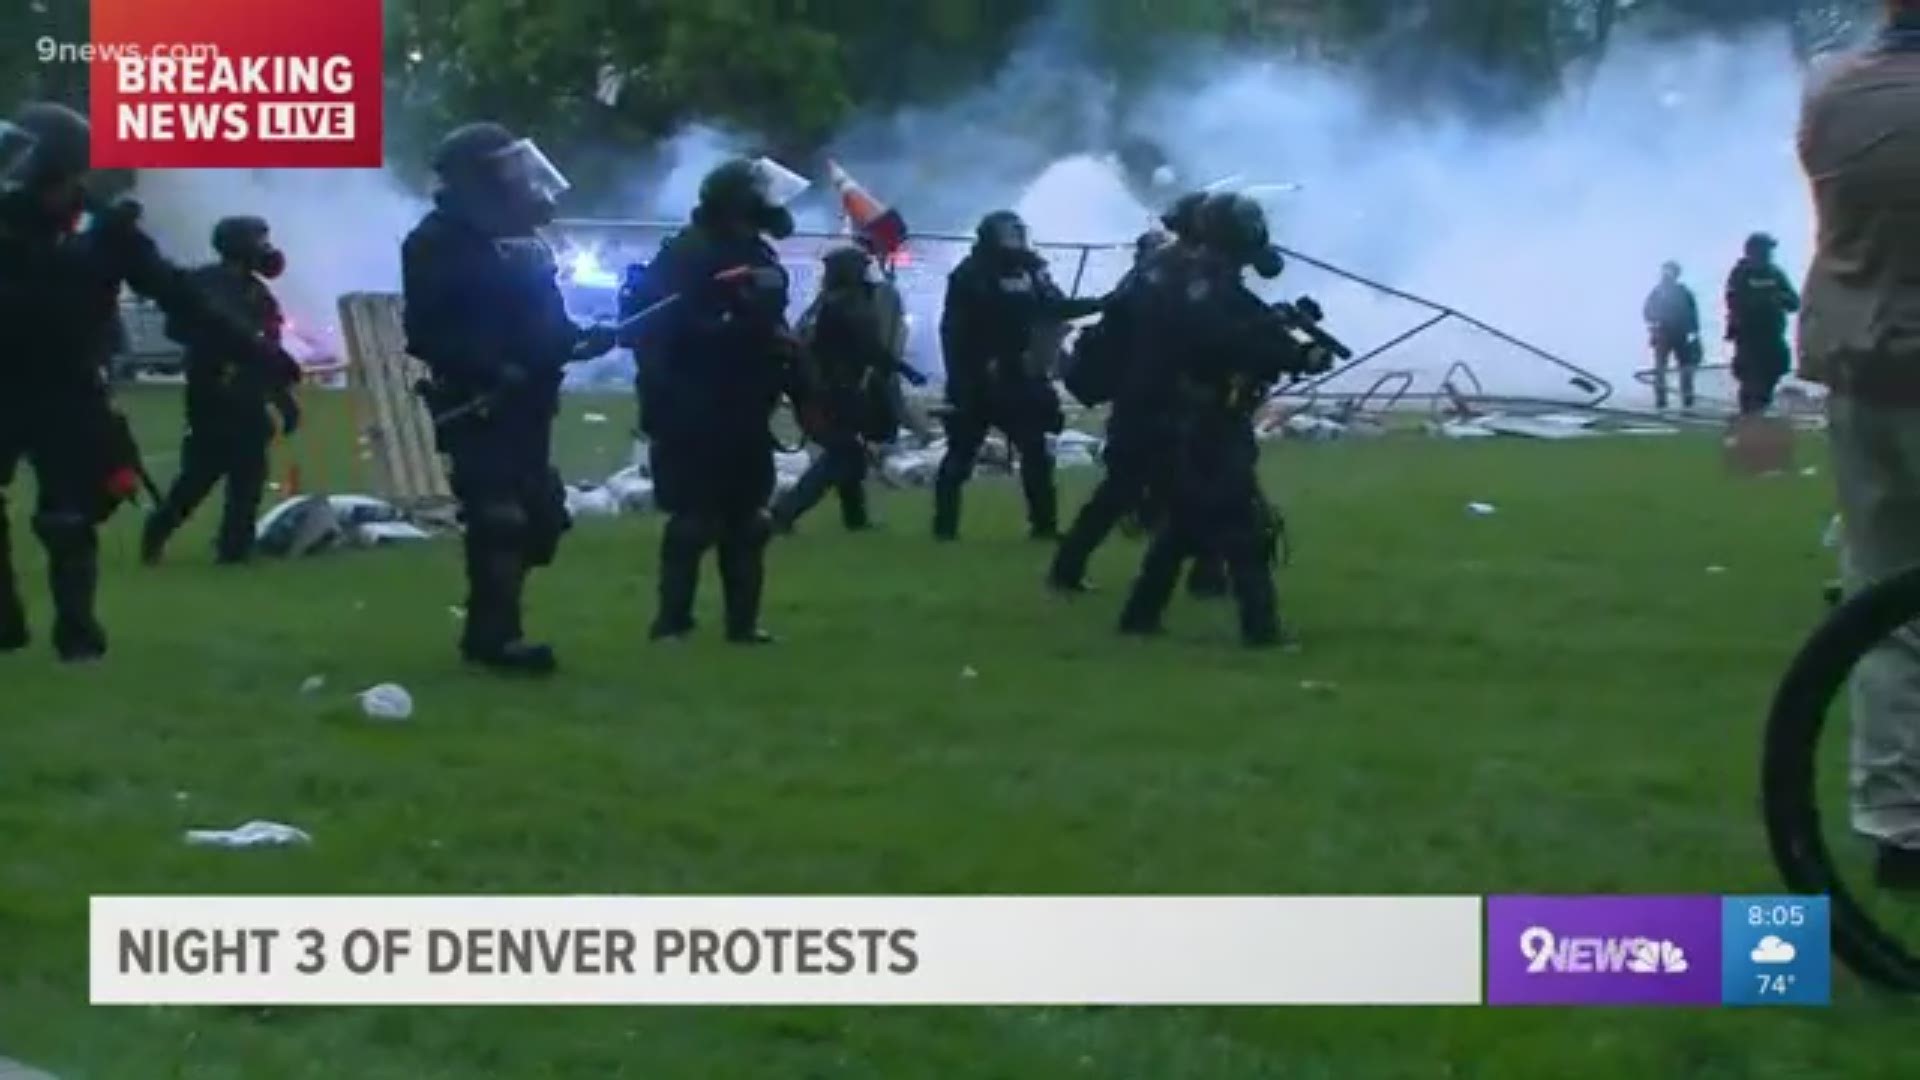 Shortly after 8 p.m. police moved in on protesters and dismantled a fence that had been put up by demonstrators.